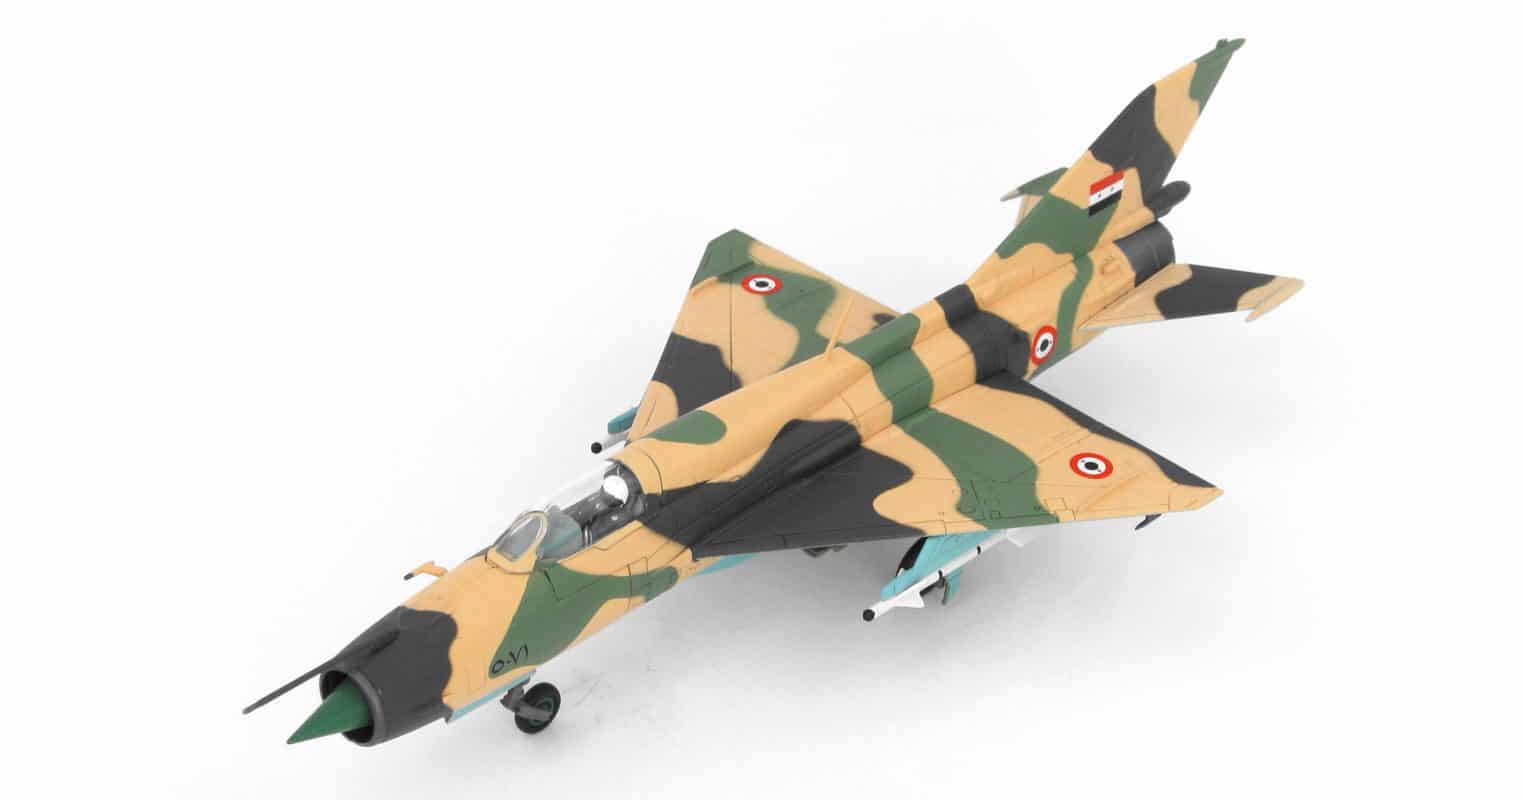 Front port side view of Hobby Master HA0190 - 1/72 scale diecast model Mikoyan-Gurevich MiG-21FL (NATO reporting name: Fishbed-D) s/n 5081 of the United Arab Republic Air Force (Egyptian AF), 1967 during the Six-Day War.